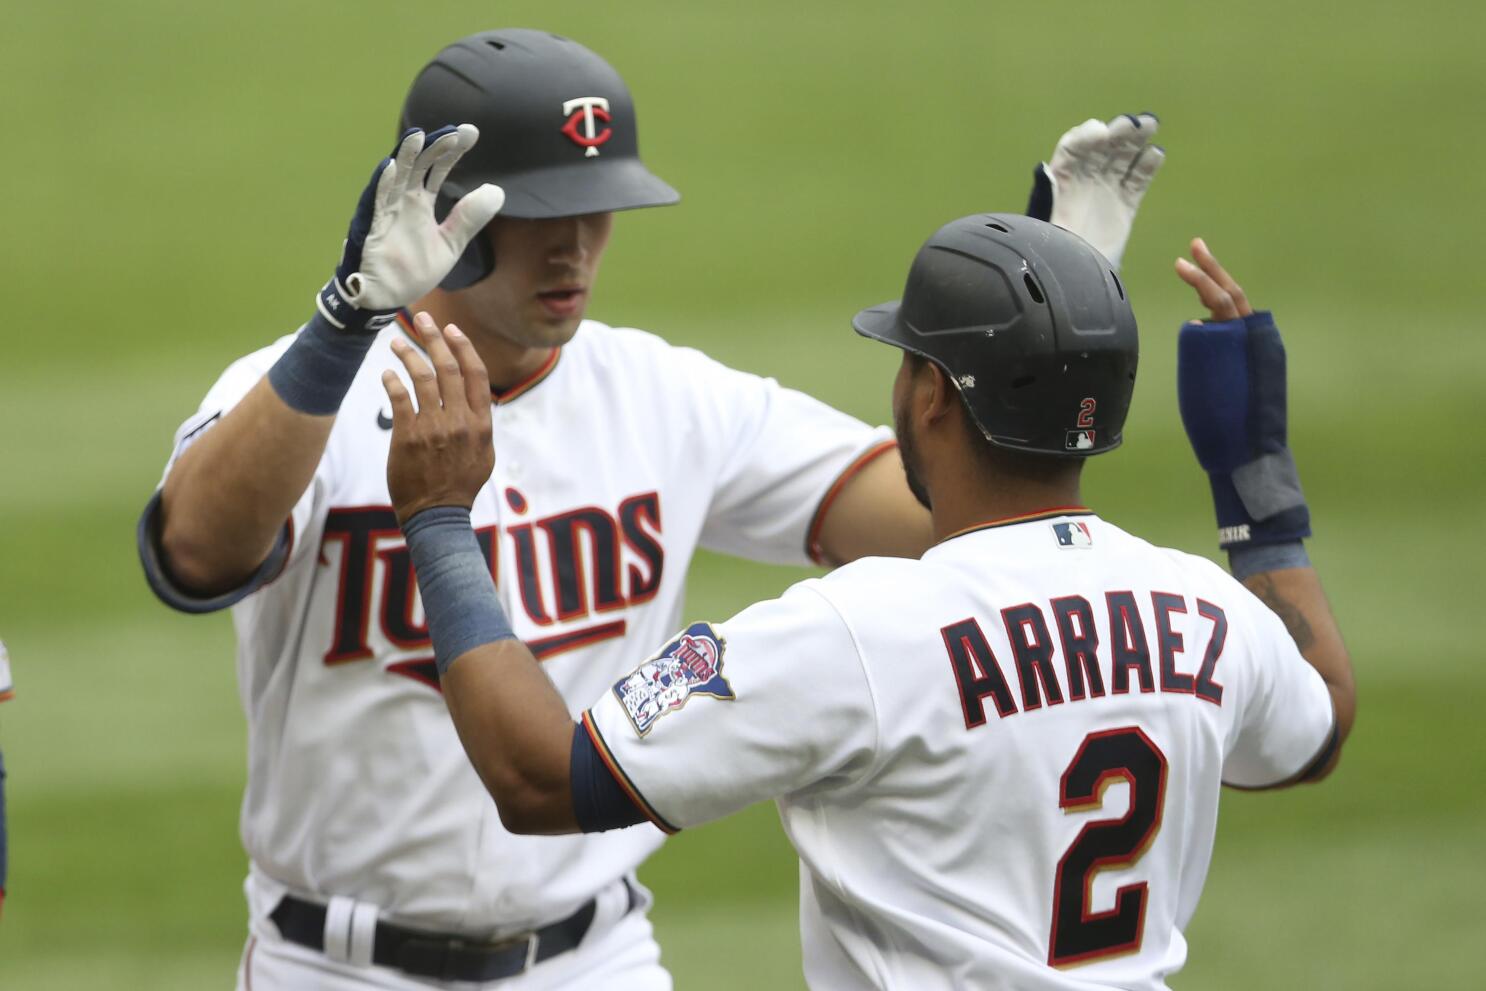 Gray sharp for 7, Arraez exits early as Twins blank Royals